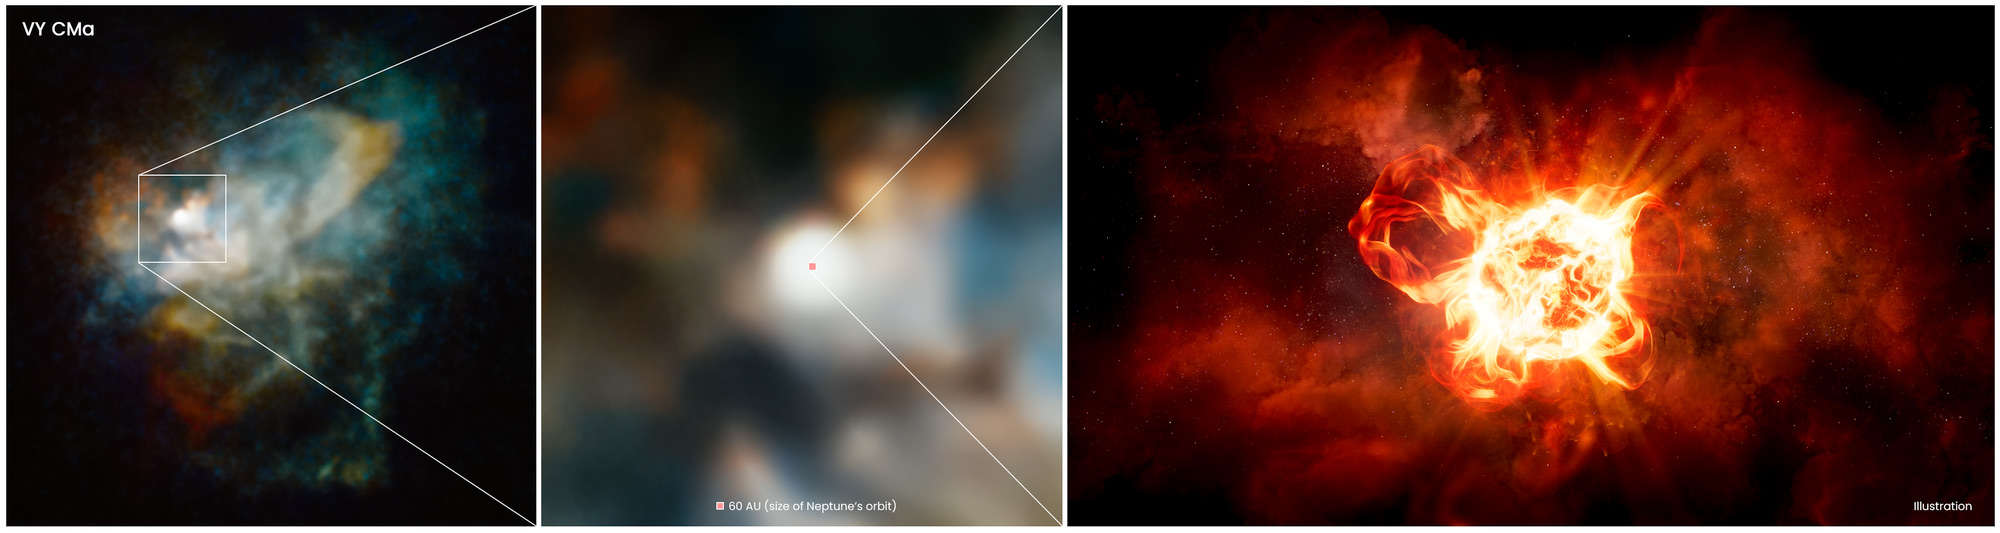 Left: Hubble’s view of the dust surrounding the star VY Canis Majoris. Middle: Zoom in on the image showing the star’s location in the dust (too small to see here). Right: Artwork of the star showing it erupting.